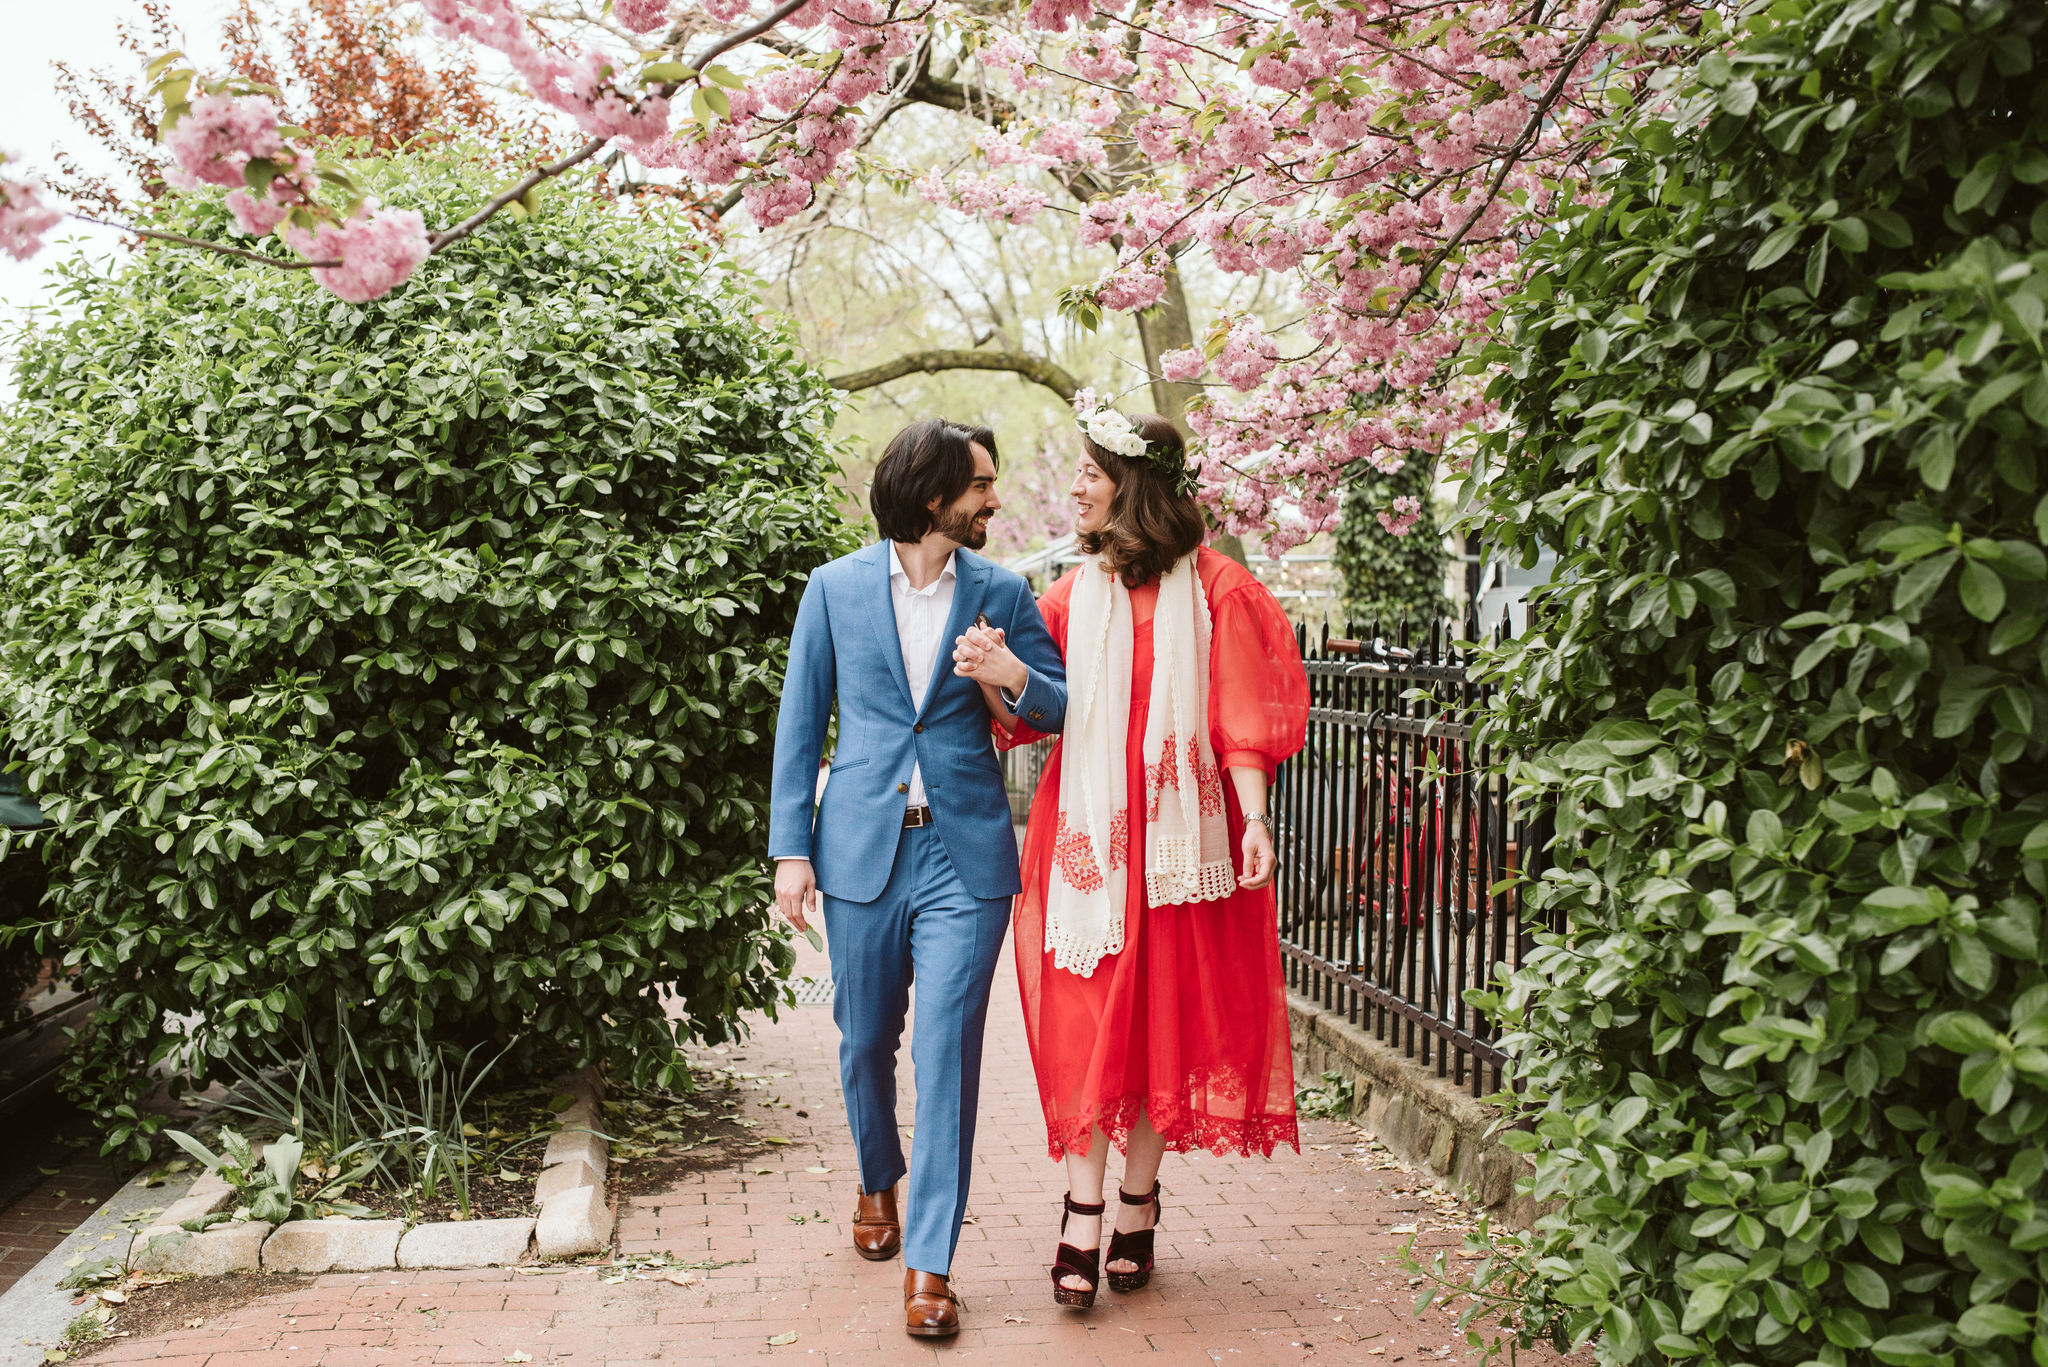  Washington DC, Baltimore Wedding Photographer, Intimate Wedding, Traditional, Classic, Palestinian, Bride and Groom Walking Hand in Hand, Red Dress, Blue Suit 